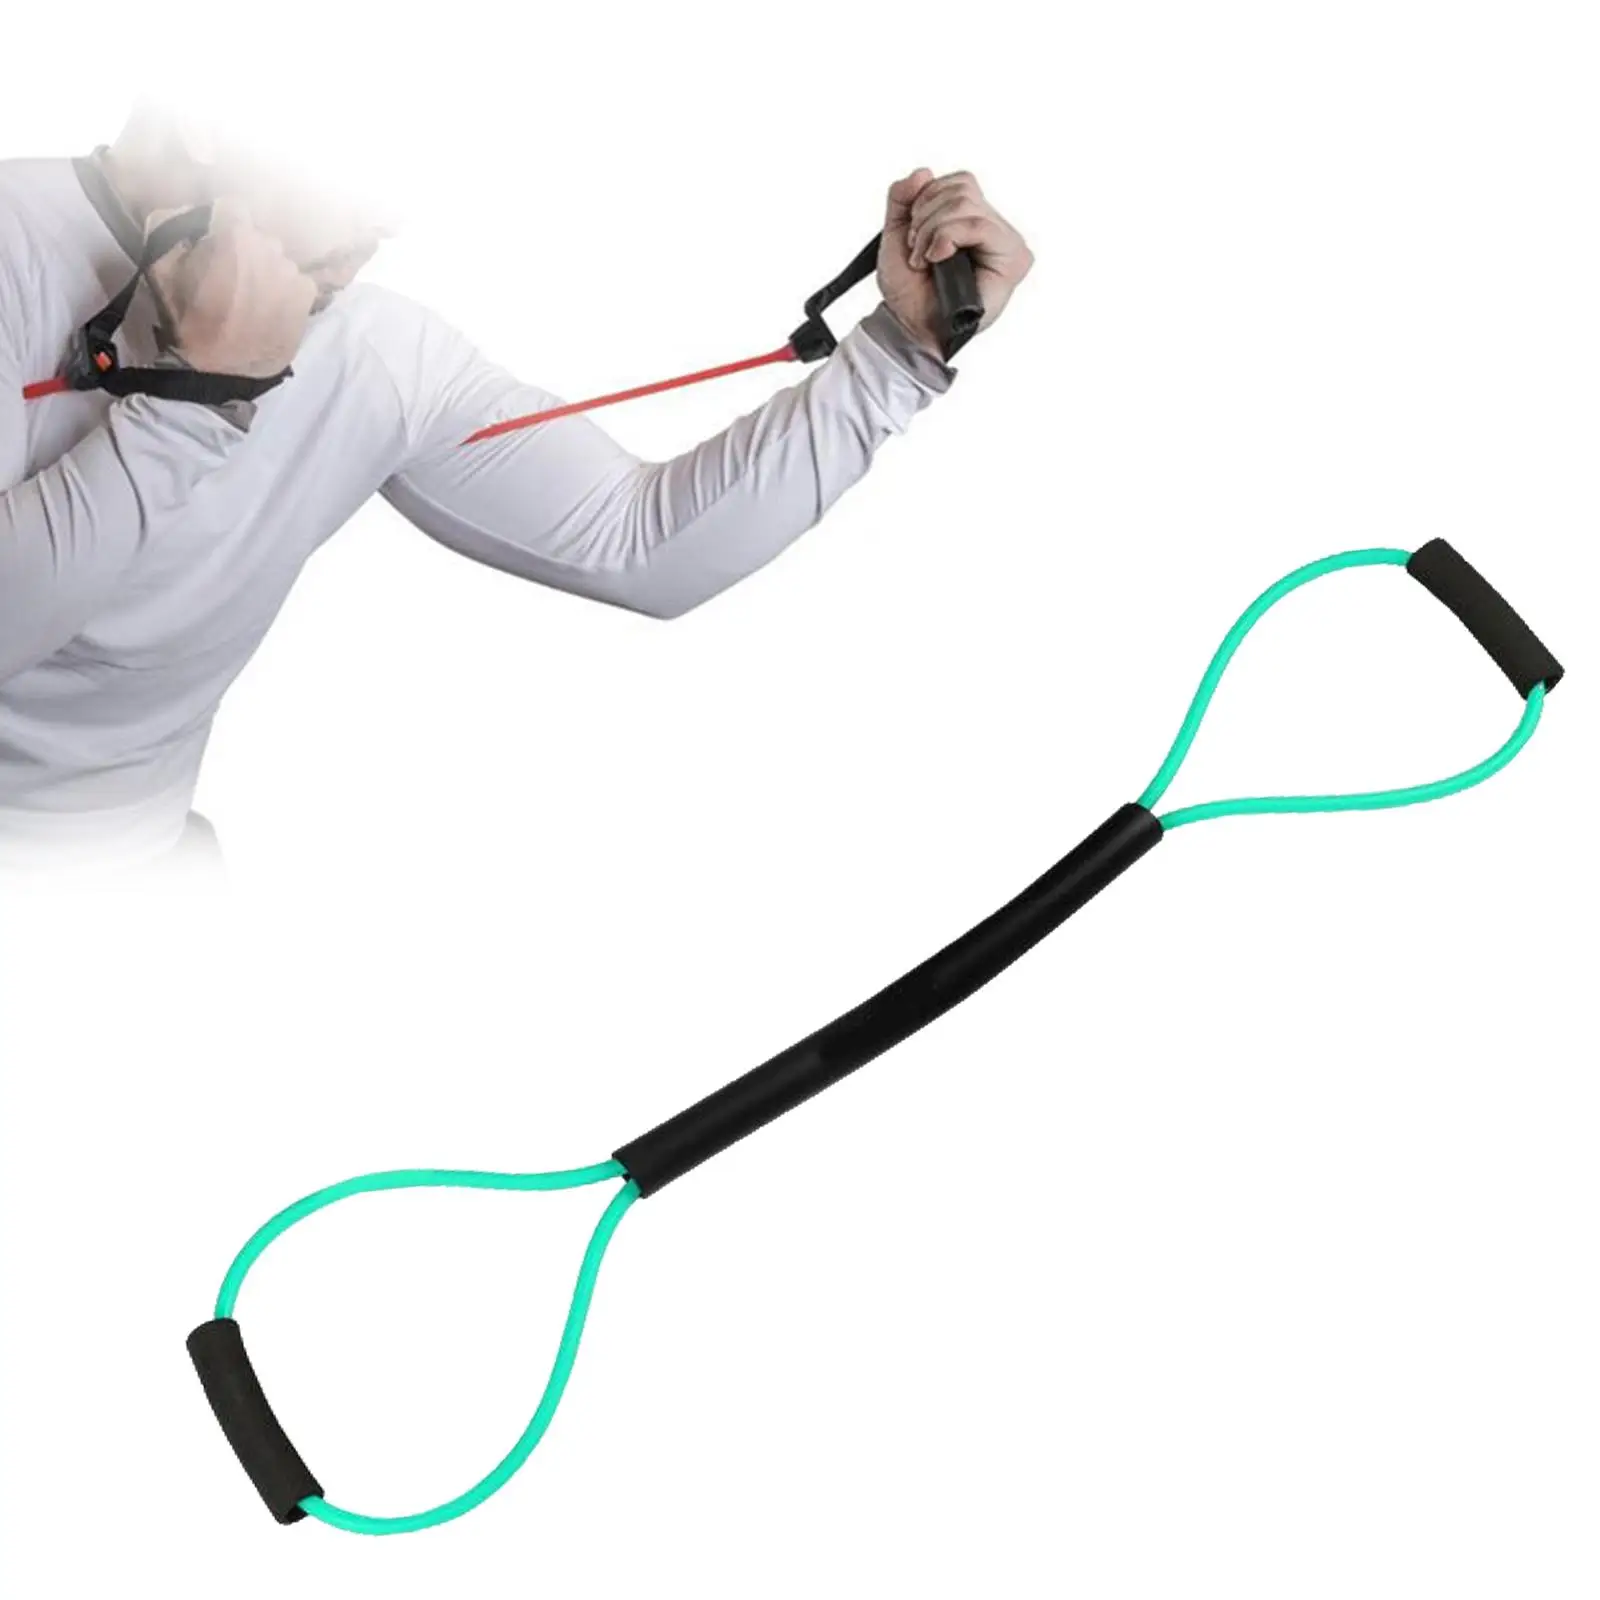 Resistance Bands Shadow Boxing Strength Training Karate Arm Exercise Gym